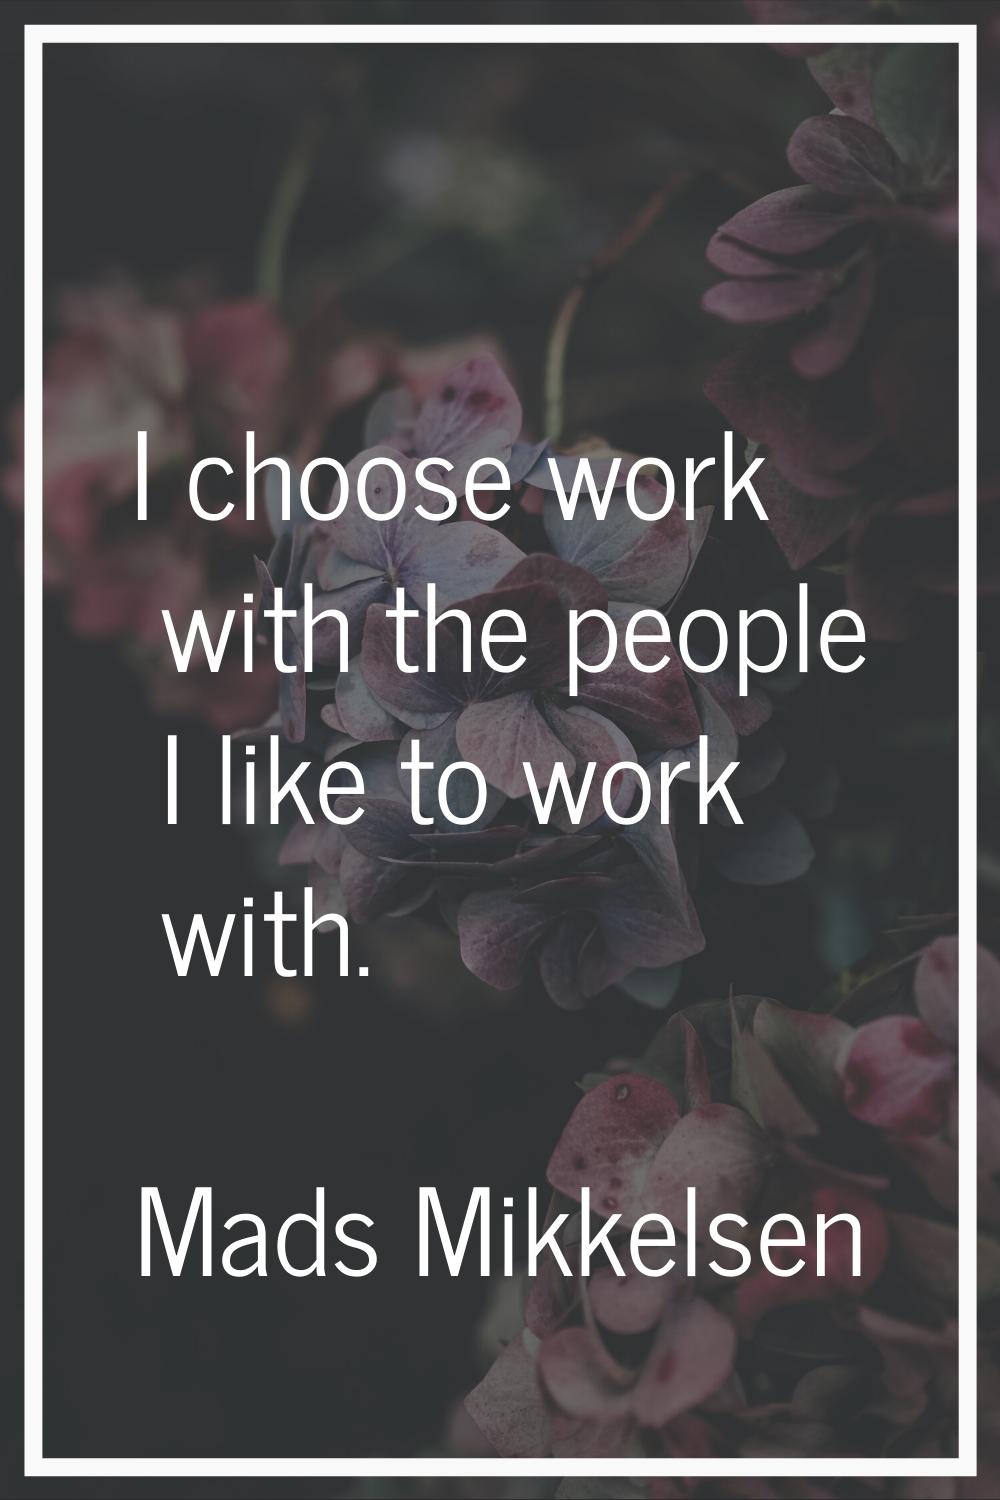 I choose work with the people I like to work with.